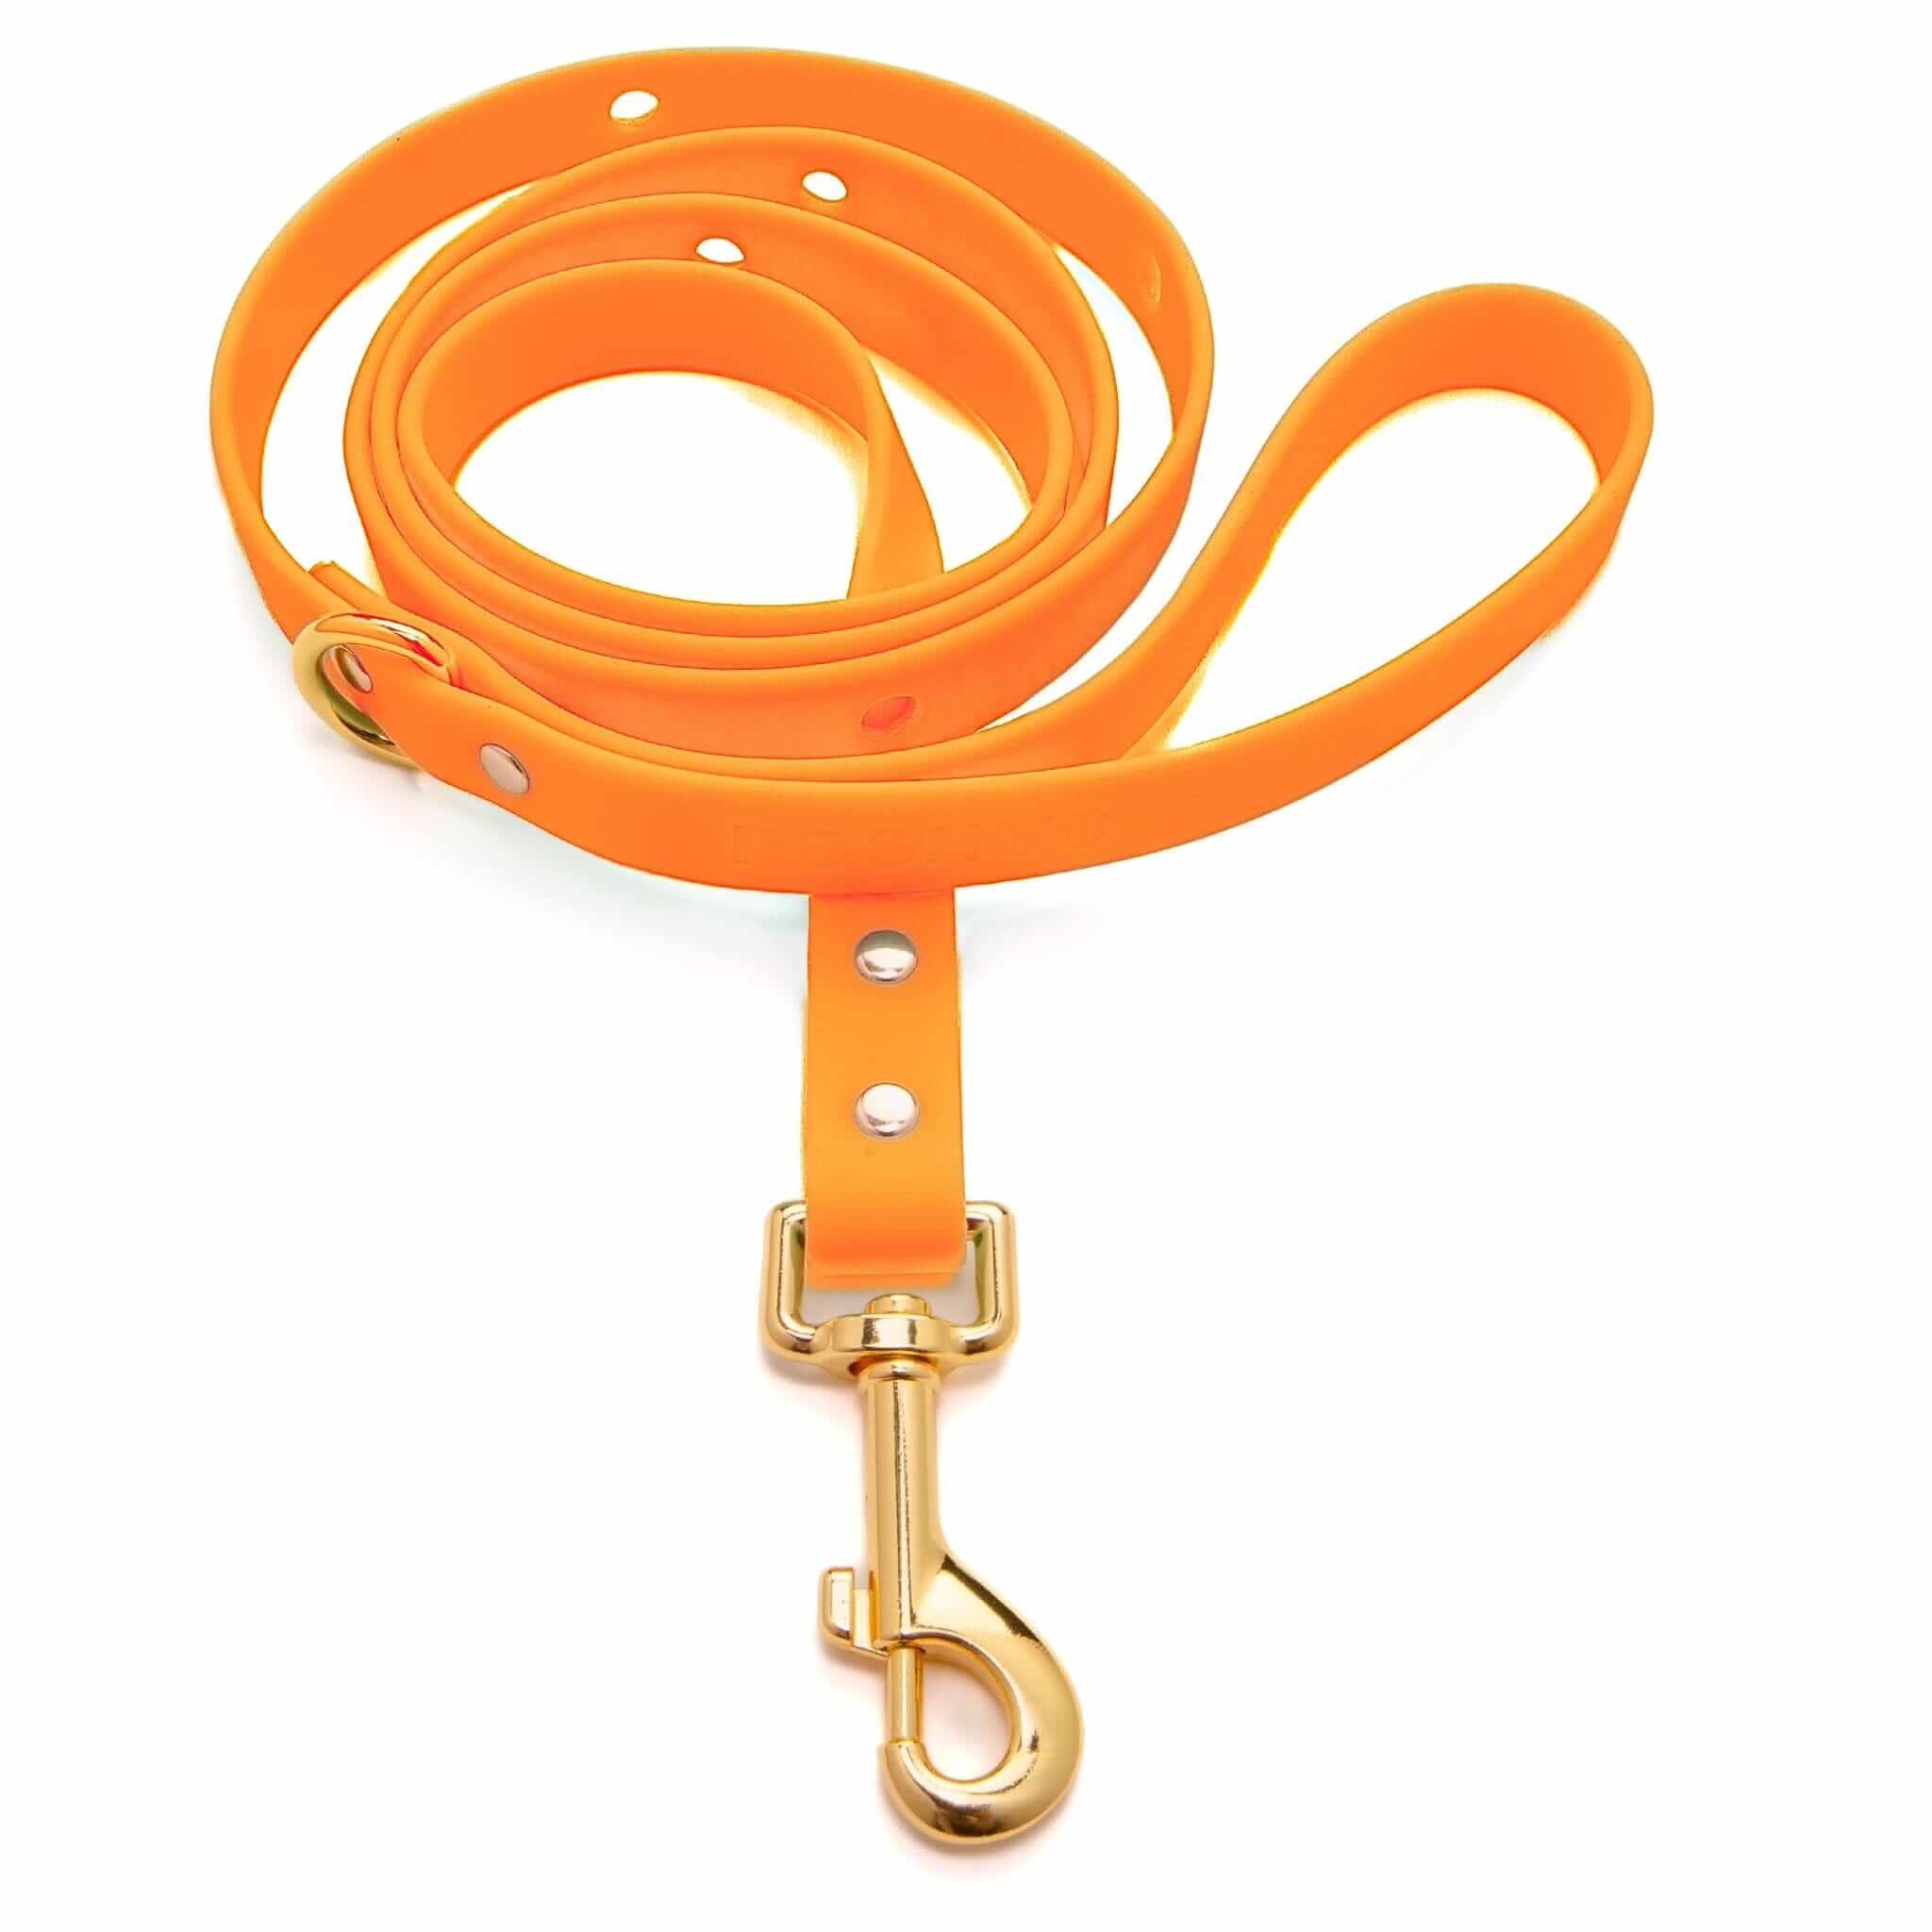 ClipUp Leash for dogs - Stylish Functionality | POSHYC